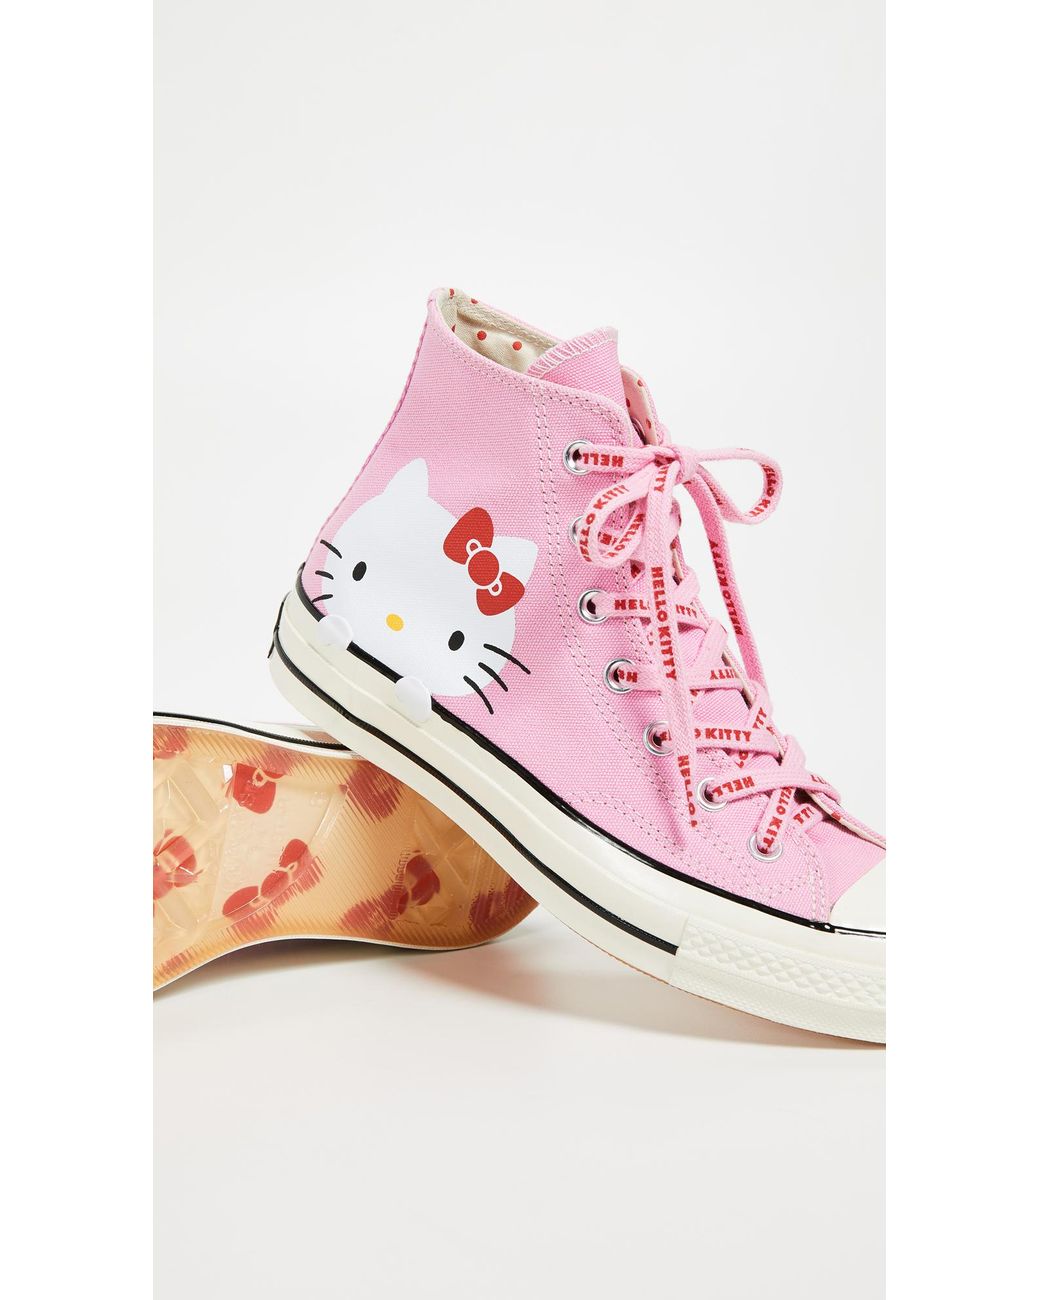 Converse Canvas Hello Kitty High Top Sneakers in Pink | Lyst